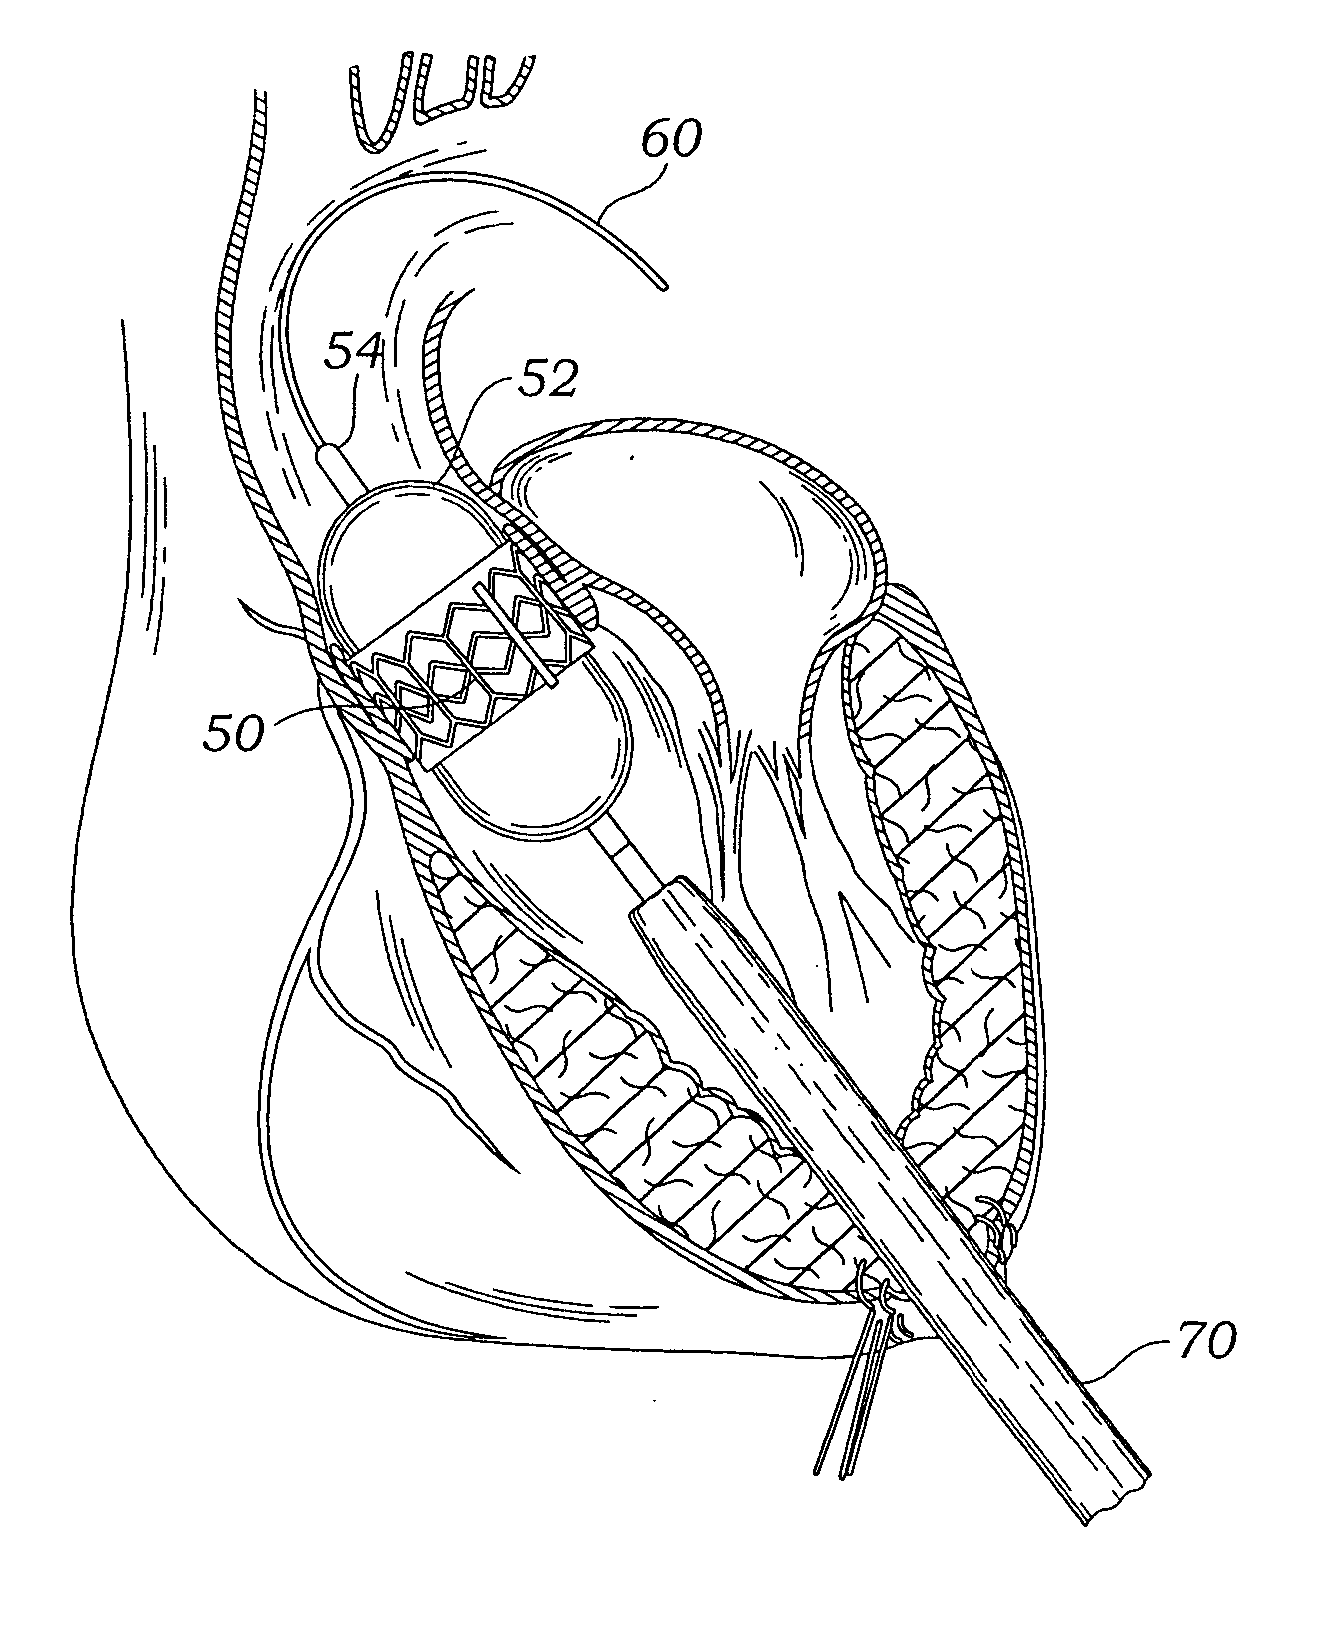 Transapical heart valve delivery system and method